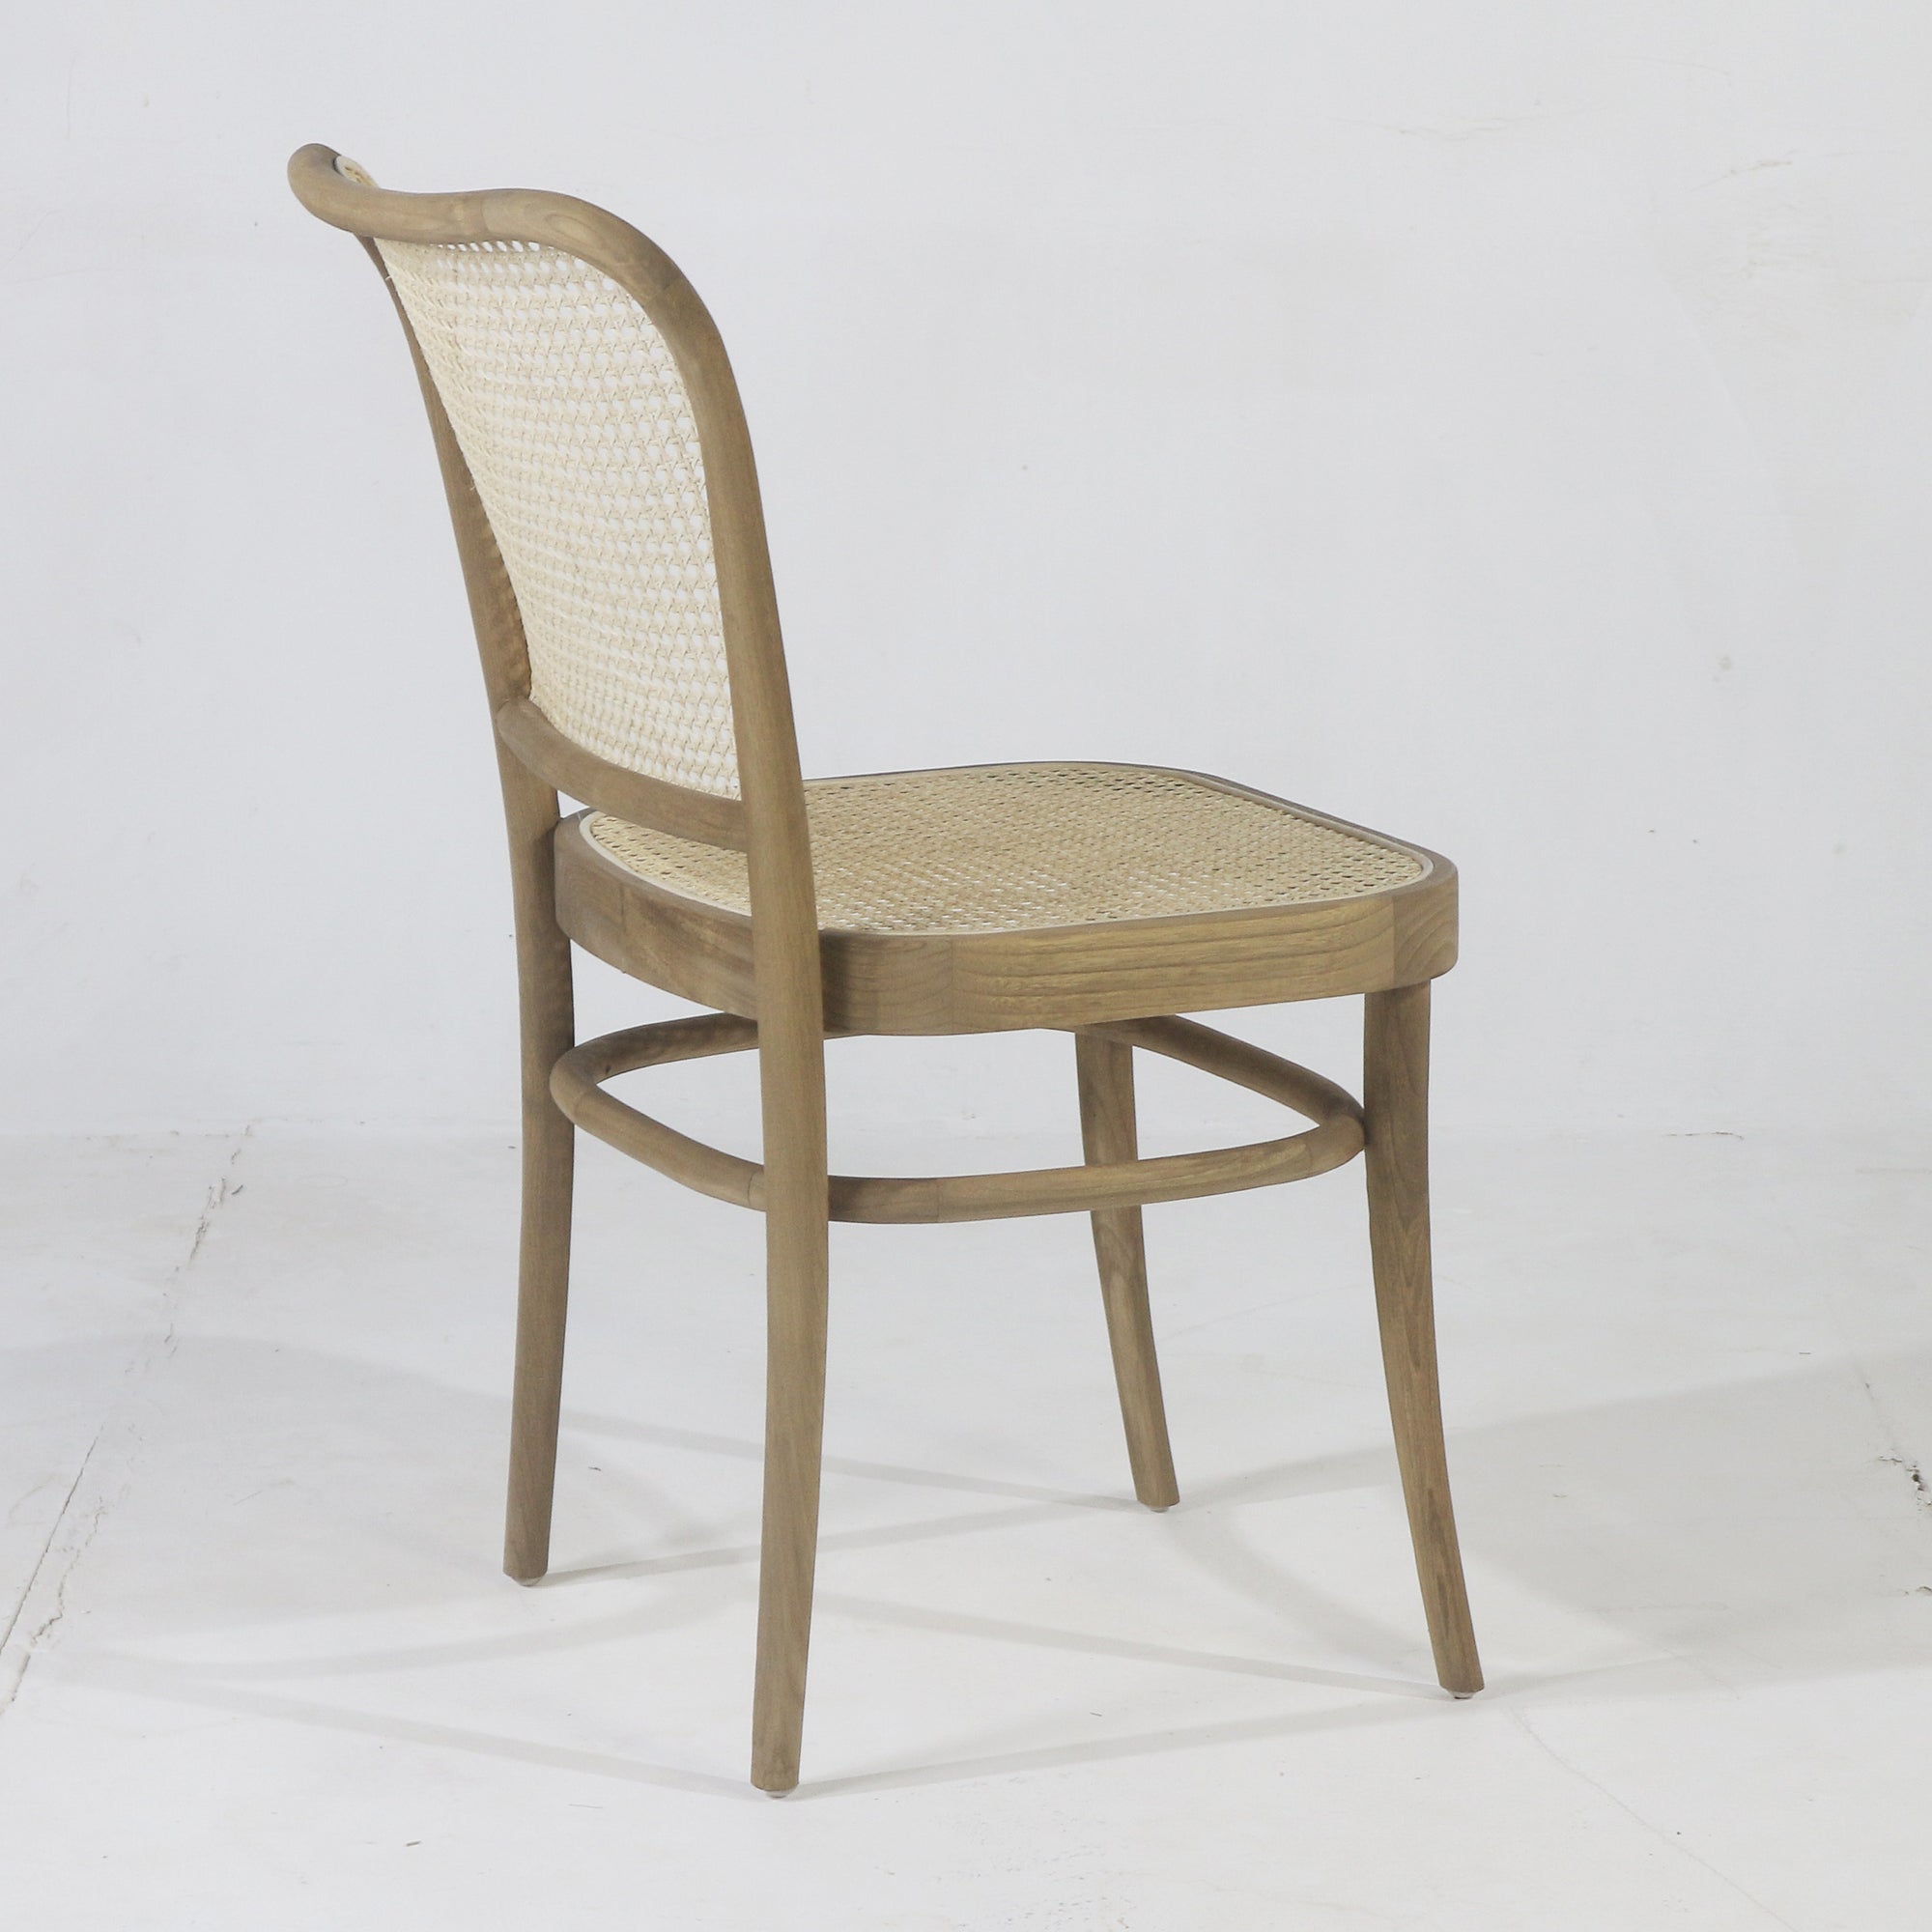 Solvang Oak Dining Chair with Cane Seat - INTERIORTONIC